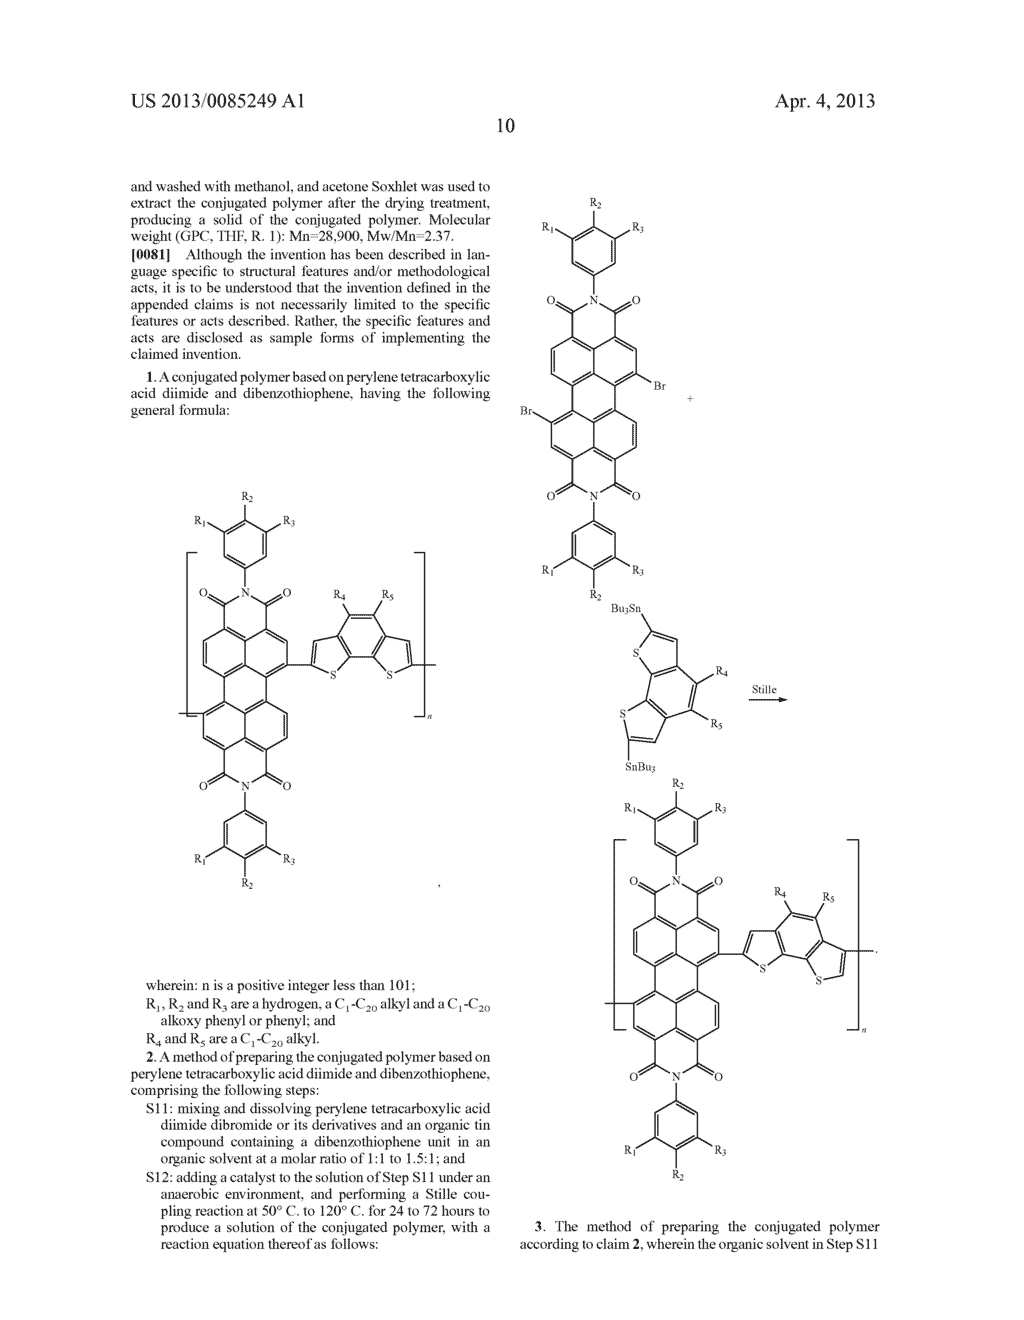 CONJUGATED POLYMER BASED ON PERYLENE TETRACARBOXYLIC ACID DIIMIDE AND     DIBENZOTHIOPHENE AND THE PREPARATION METHOD AND APPLICATION THEREOF - diagram, schematic, and image 12